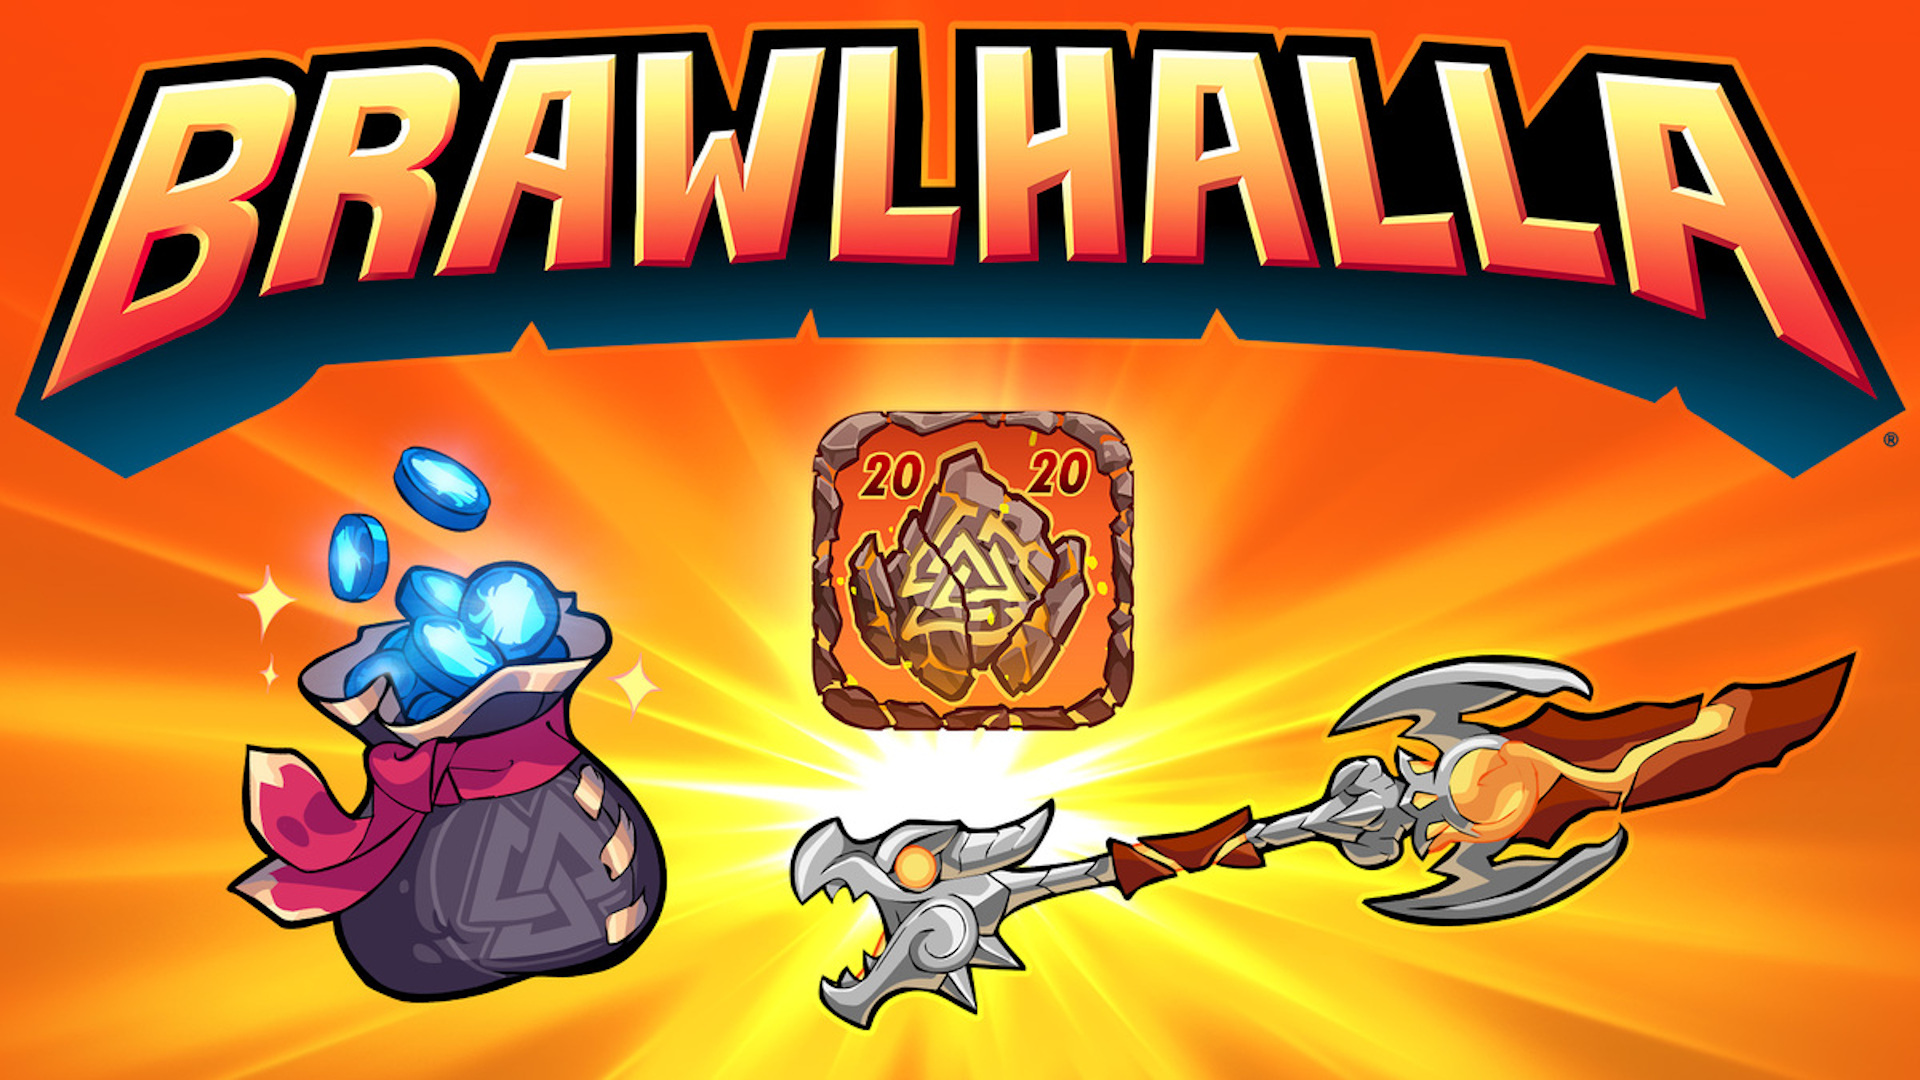 Brawlhalla - autumn championship 2020 pack and roll